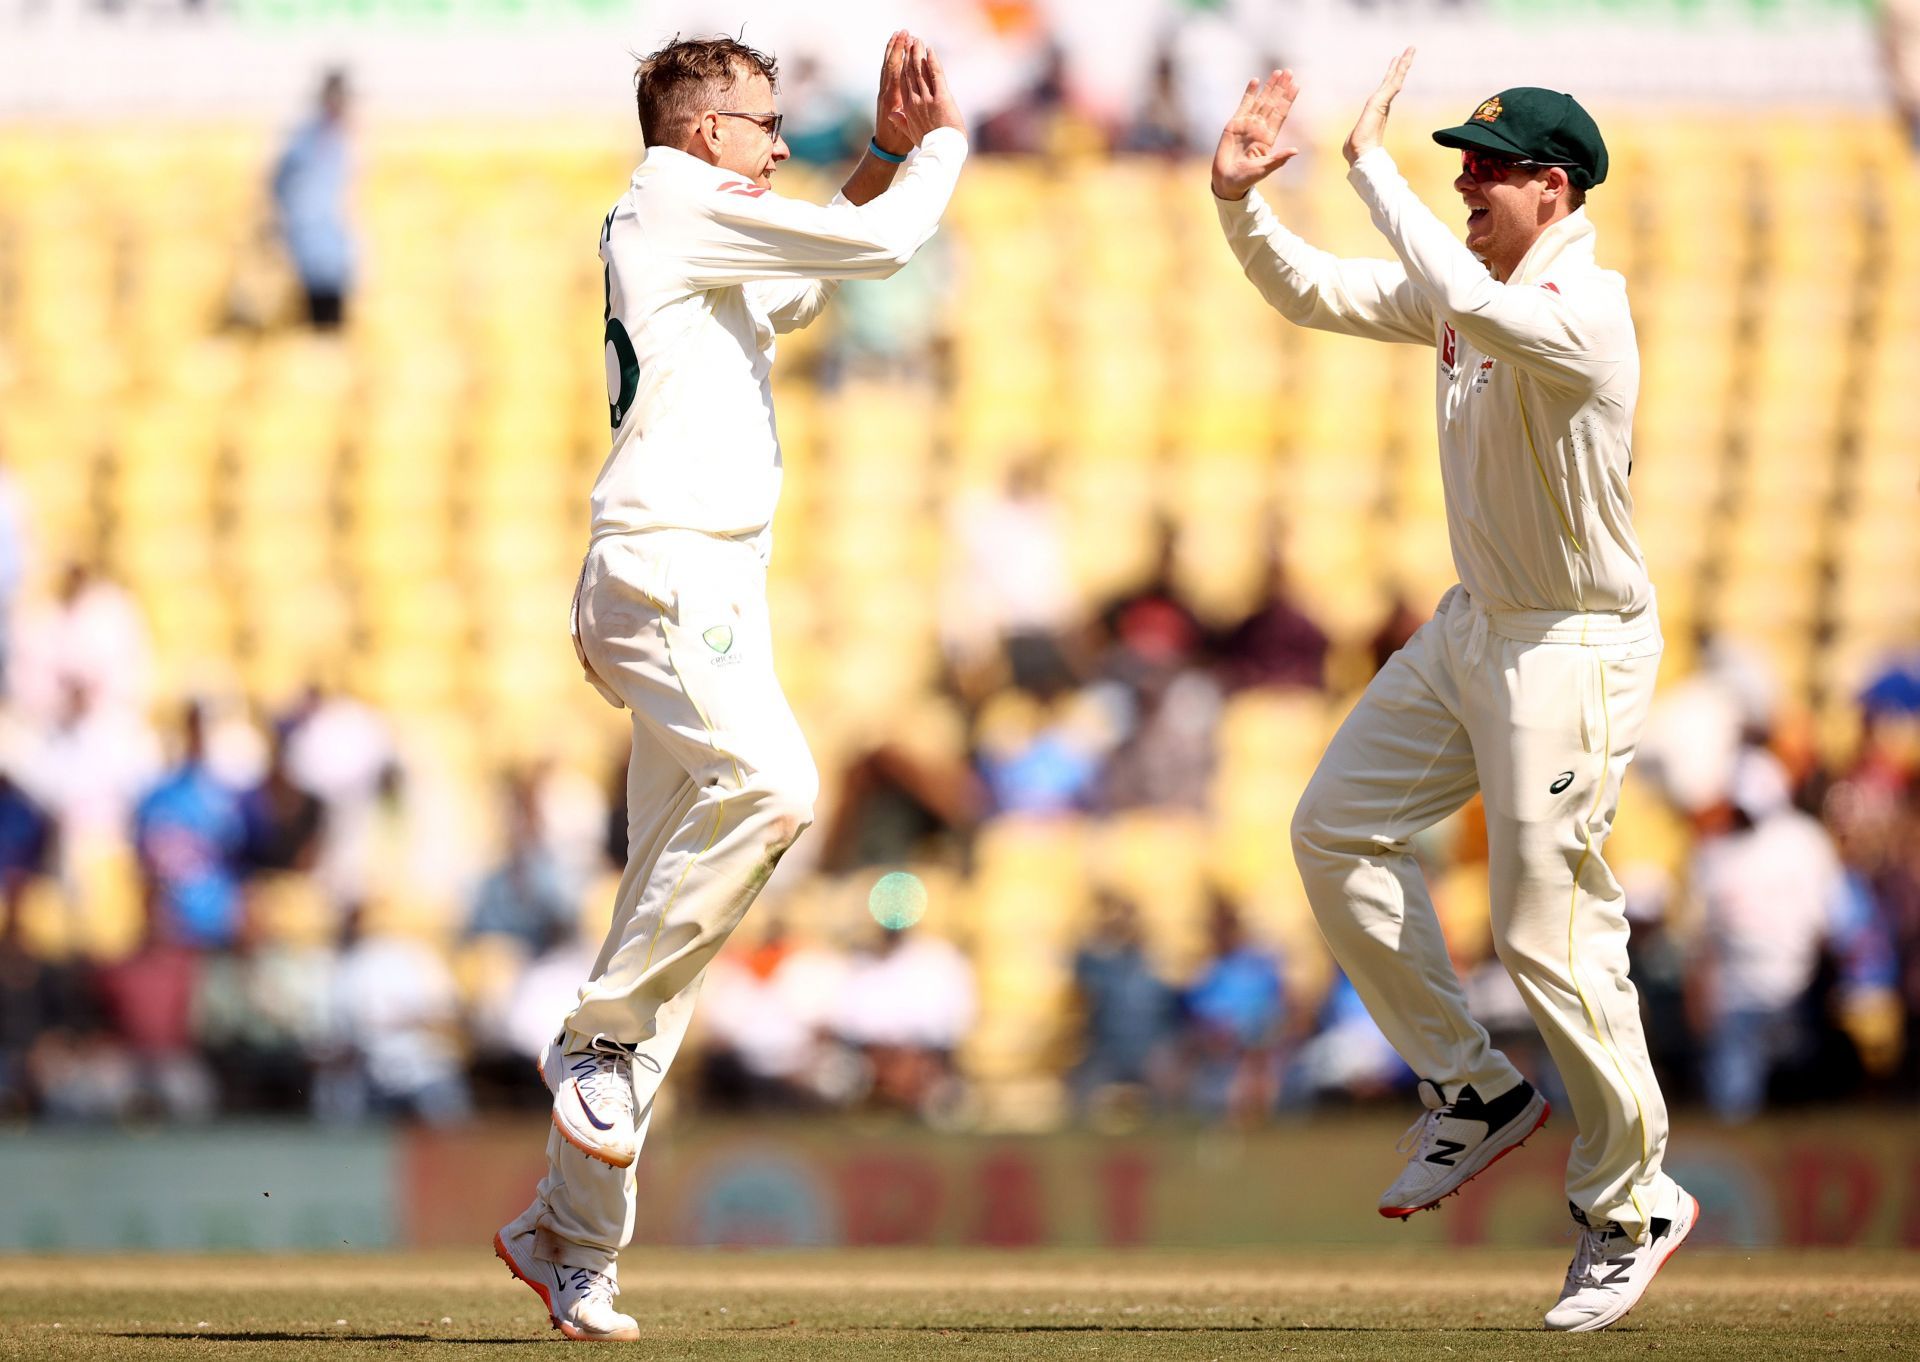 Todd Murphy and Steve Smith. (Image Credits: Getty)